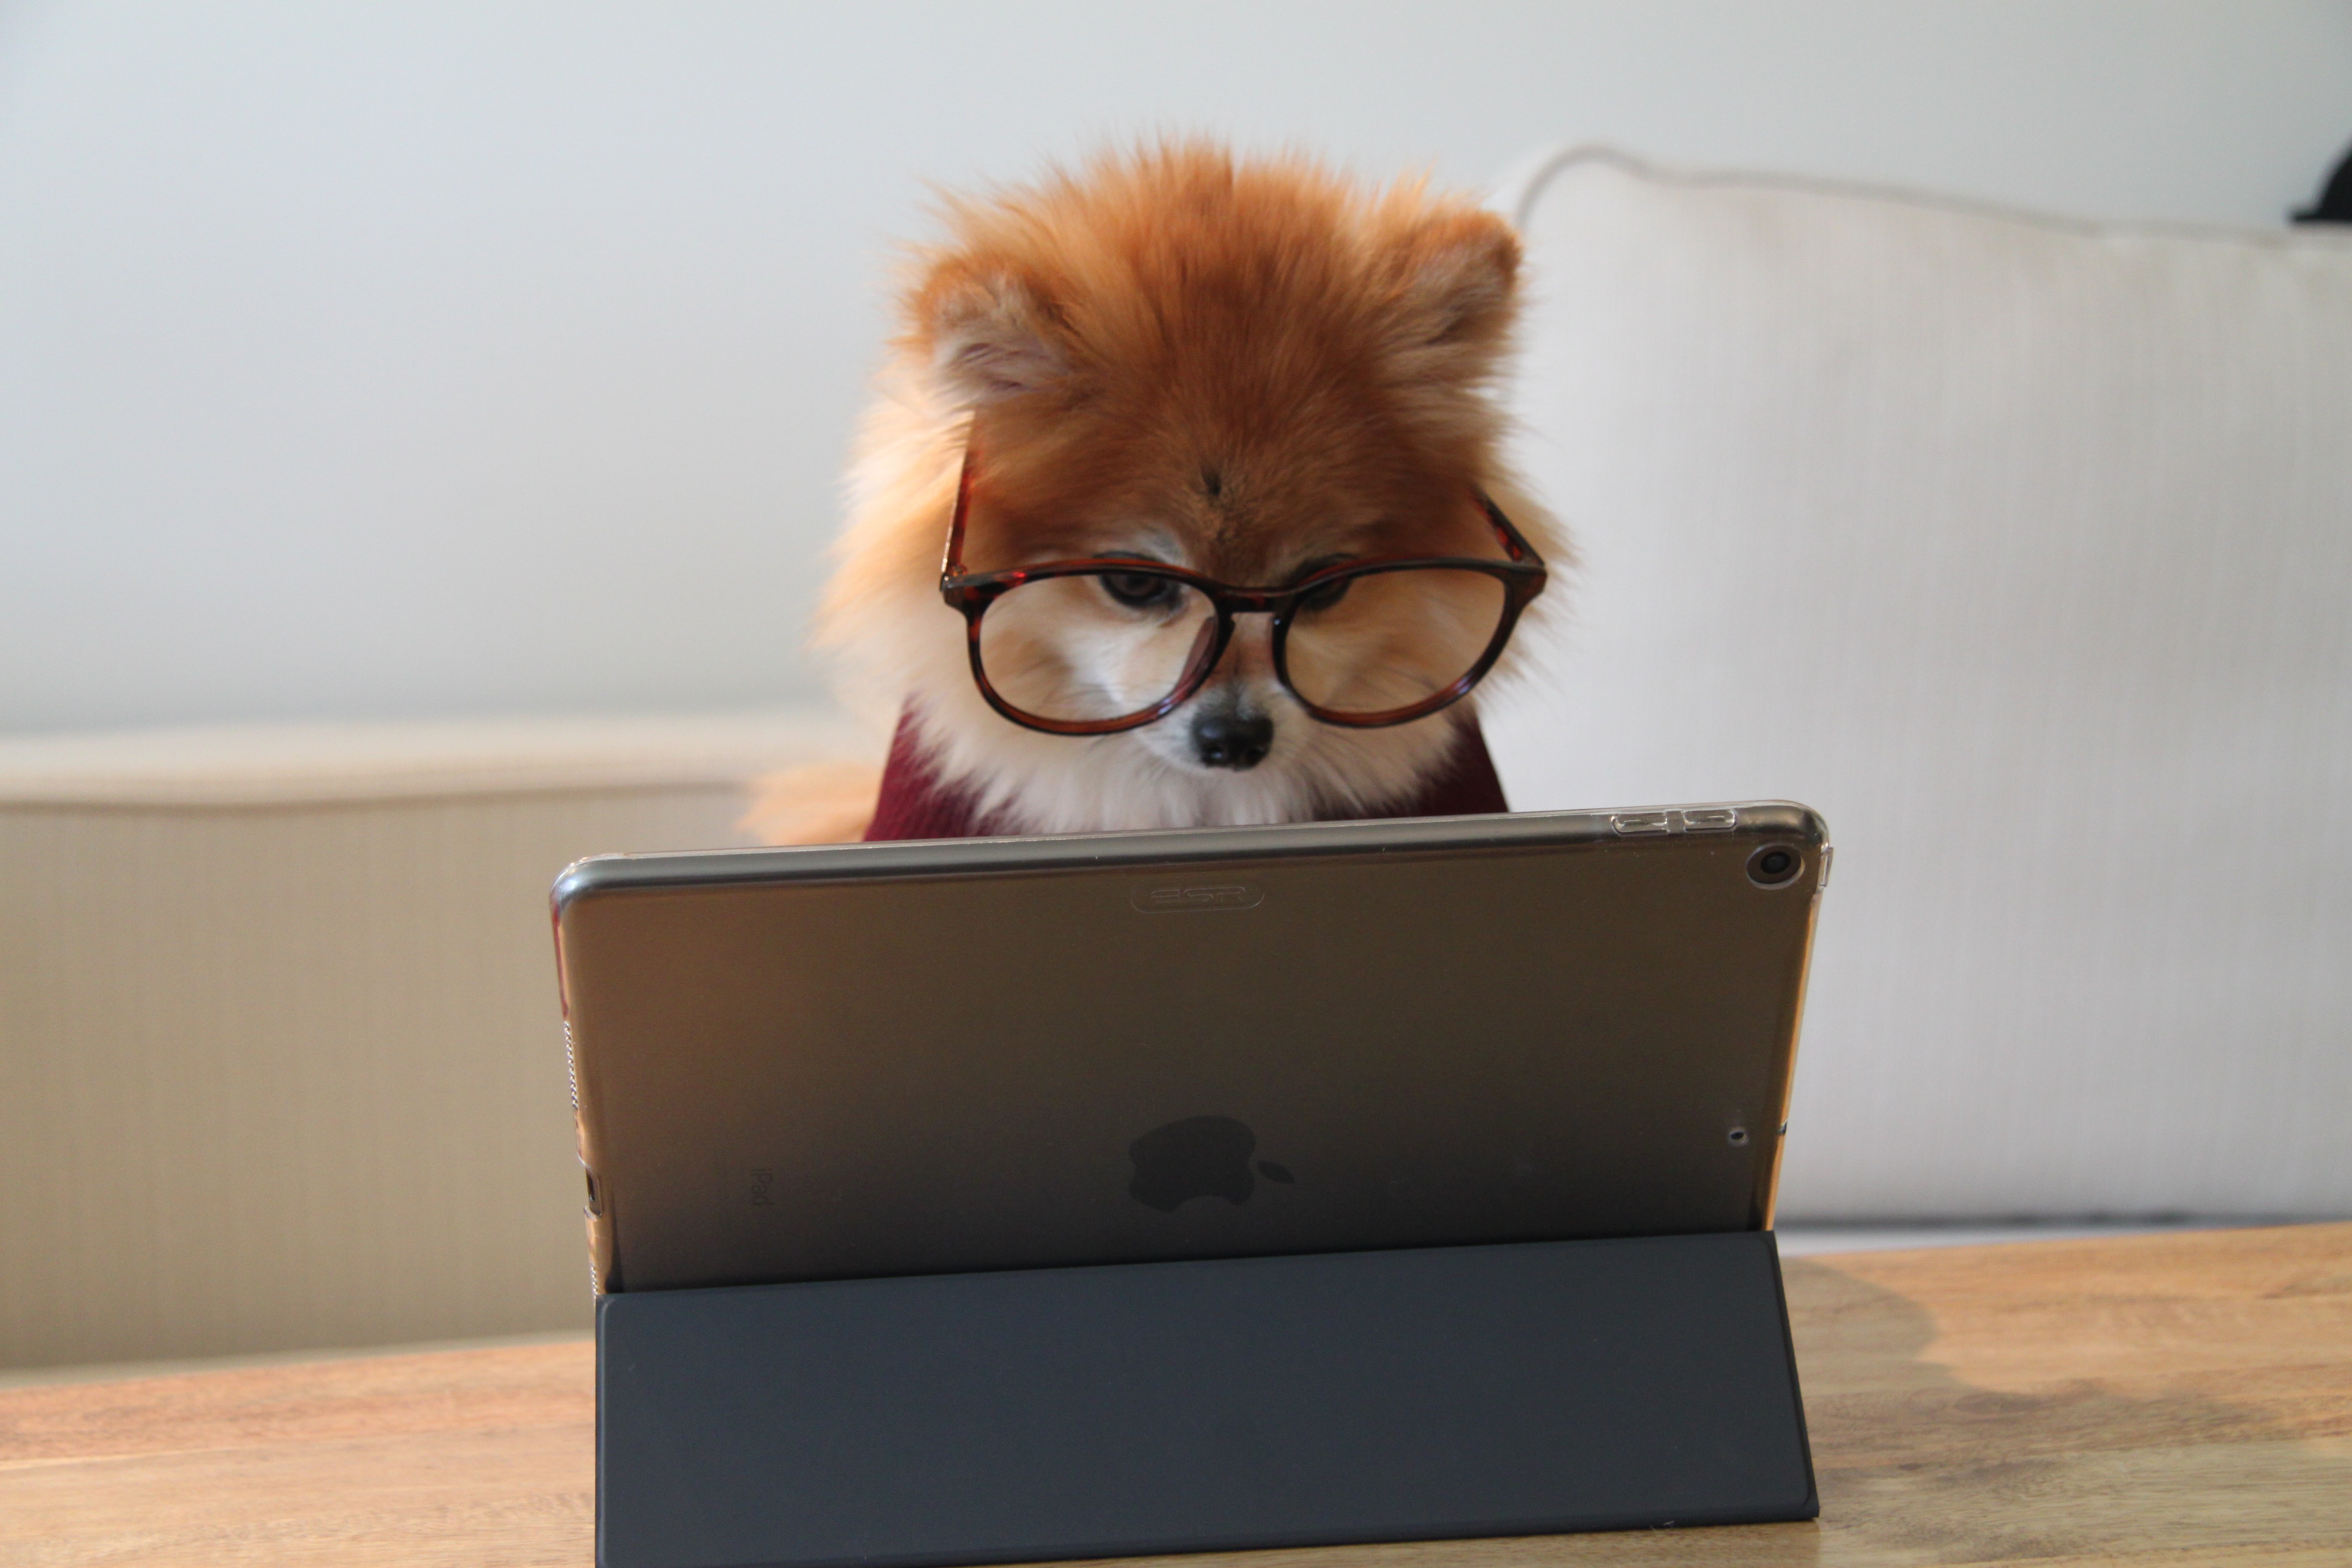 dog wearing glasses looking at a tablet